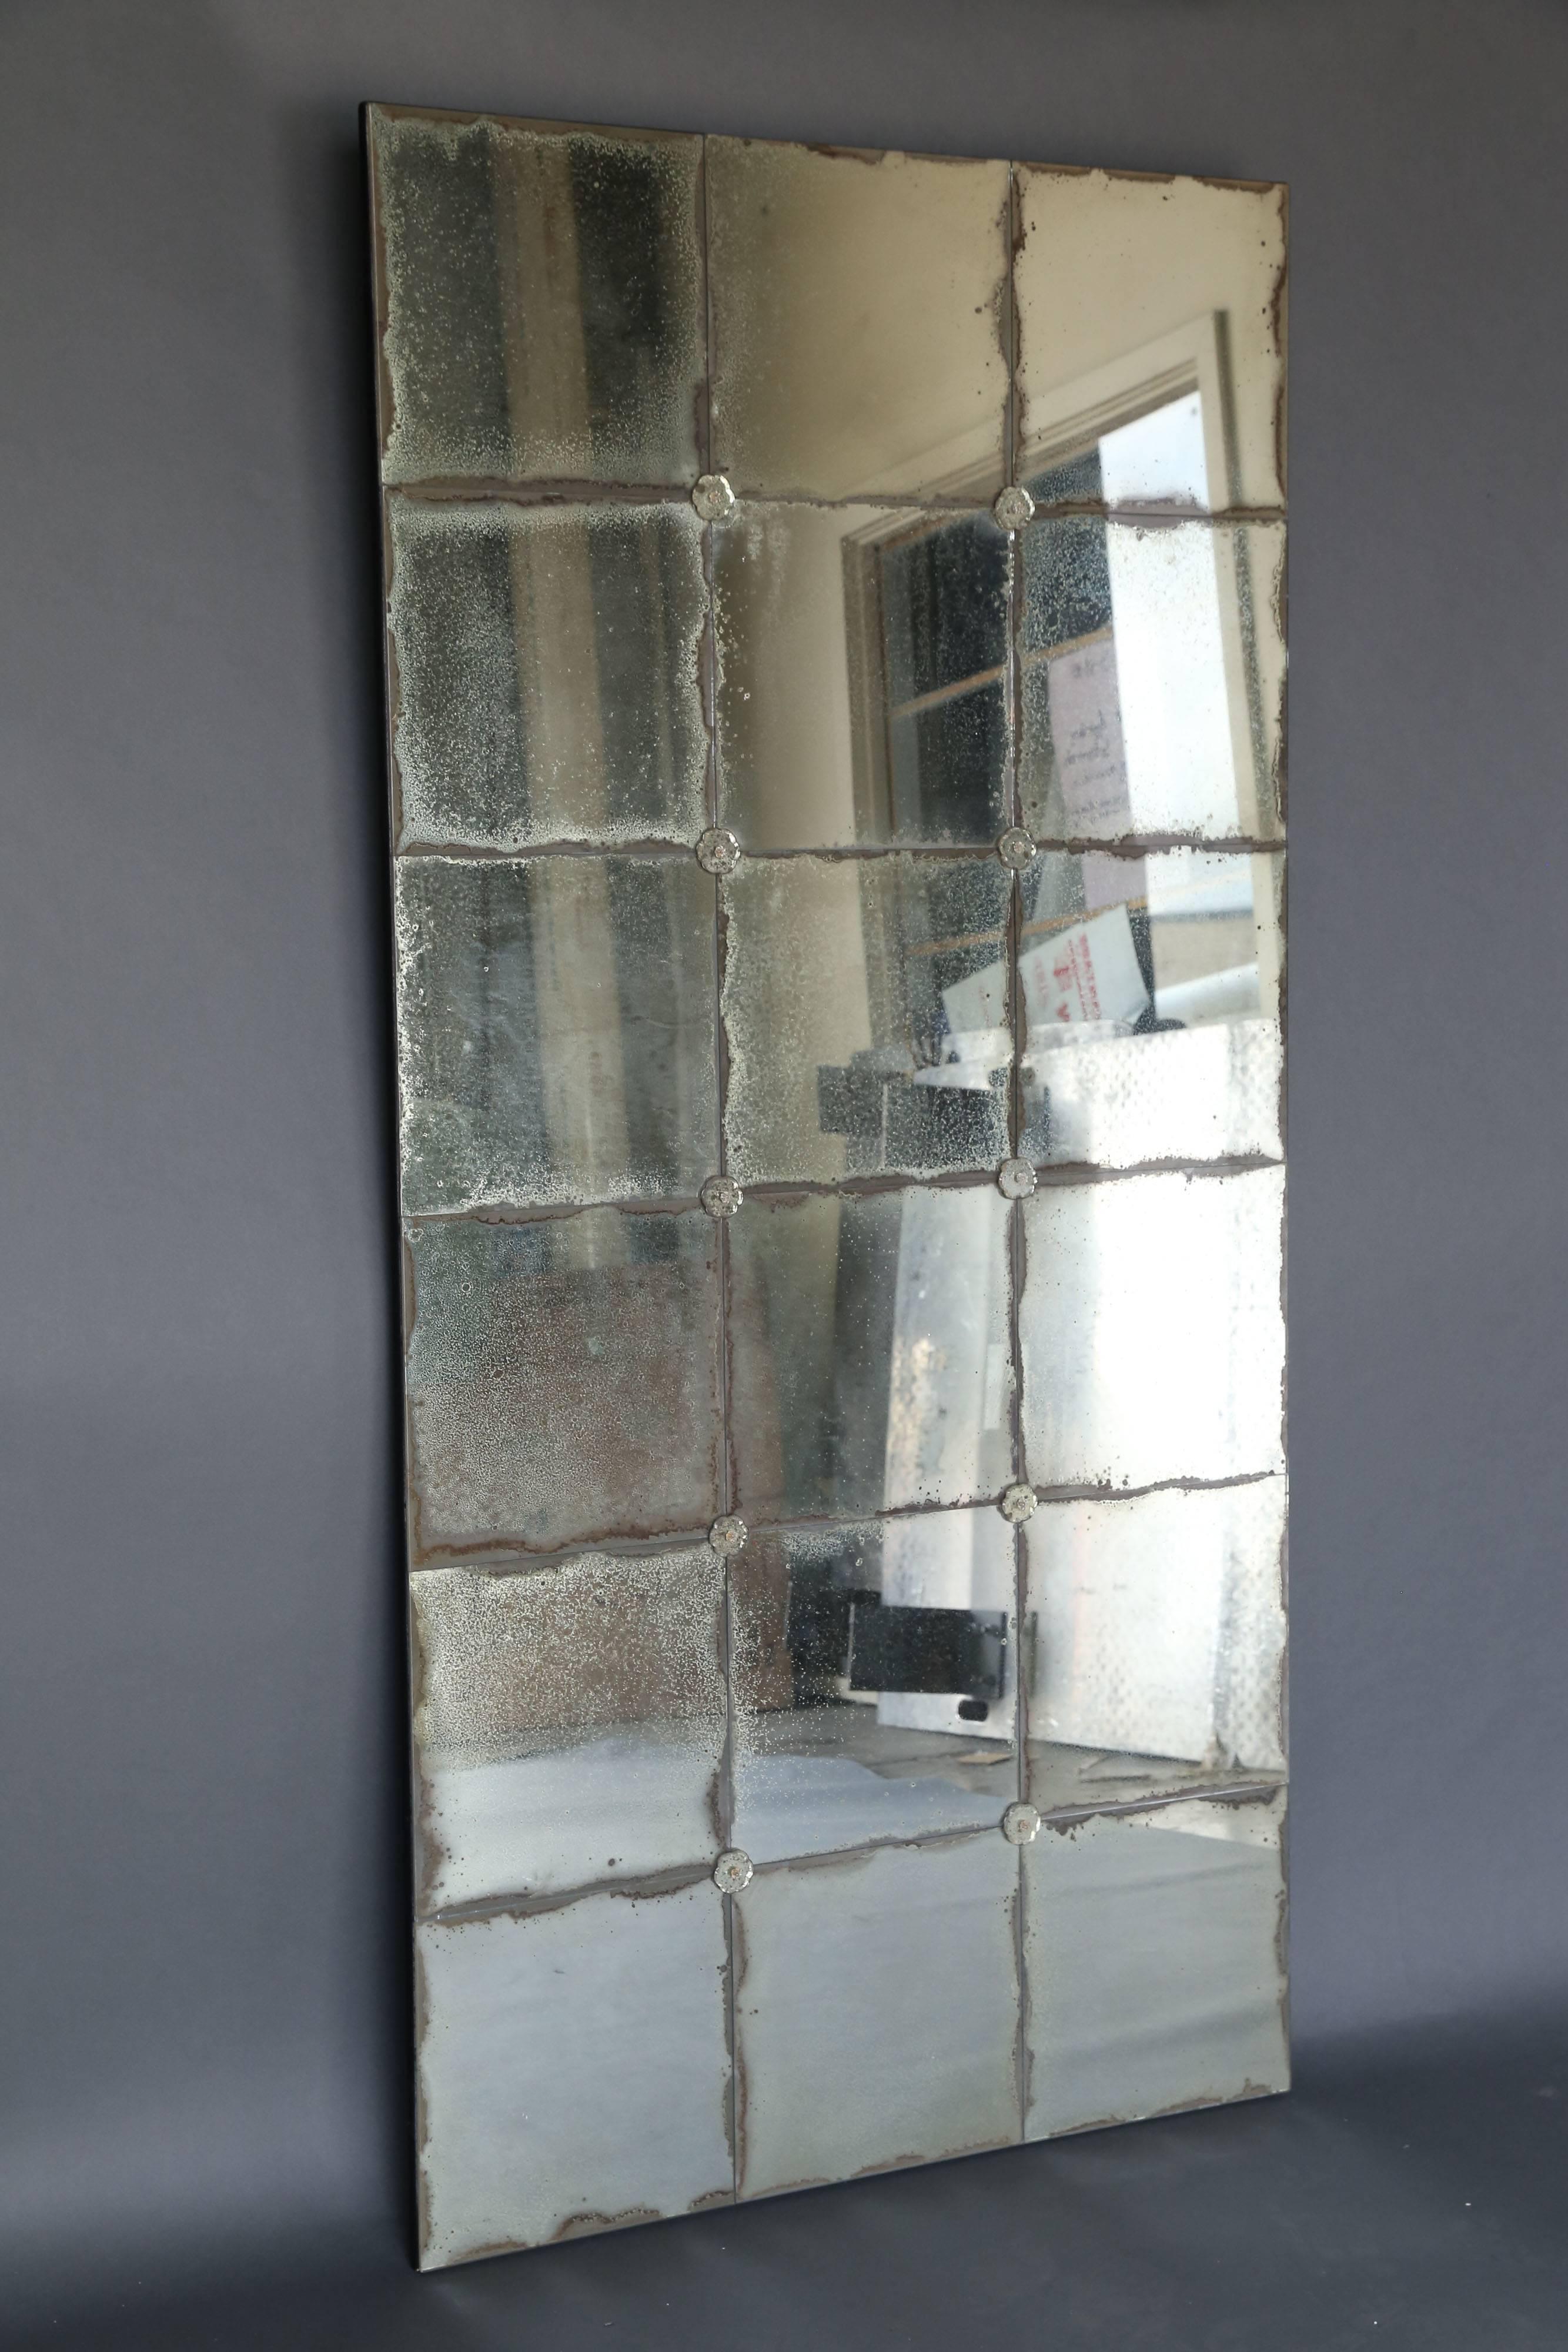 Antique 18th century mirror made of squares from various old mercury mirrors with glass rosettes in each of the four intersecting corners. Very decorative mix of antique with a modern feel.